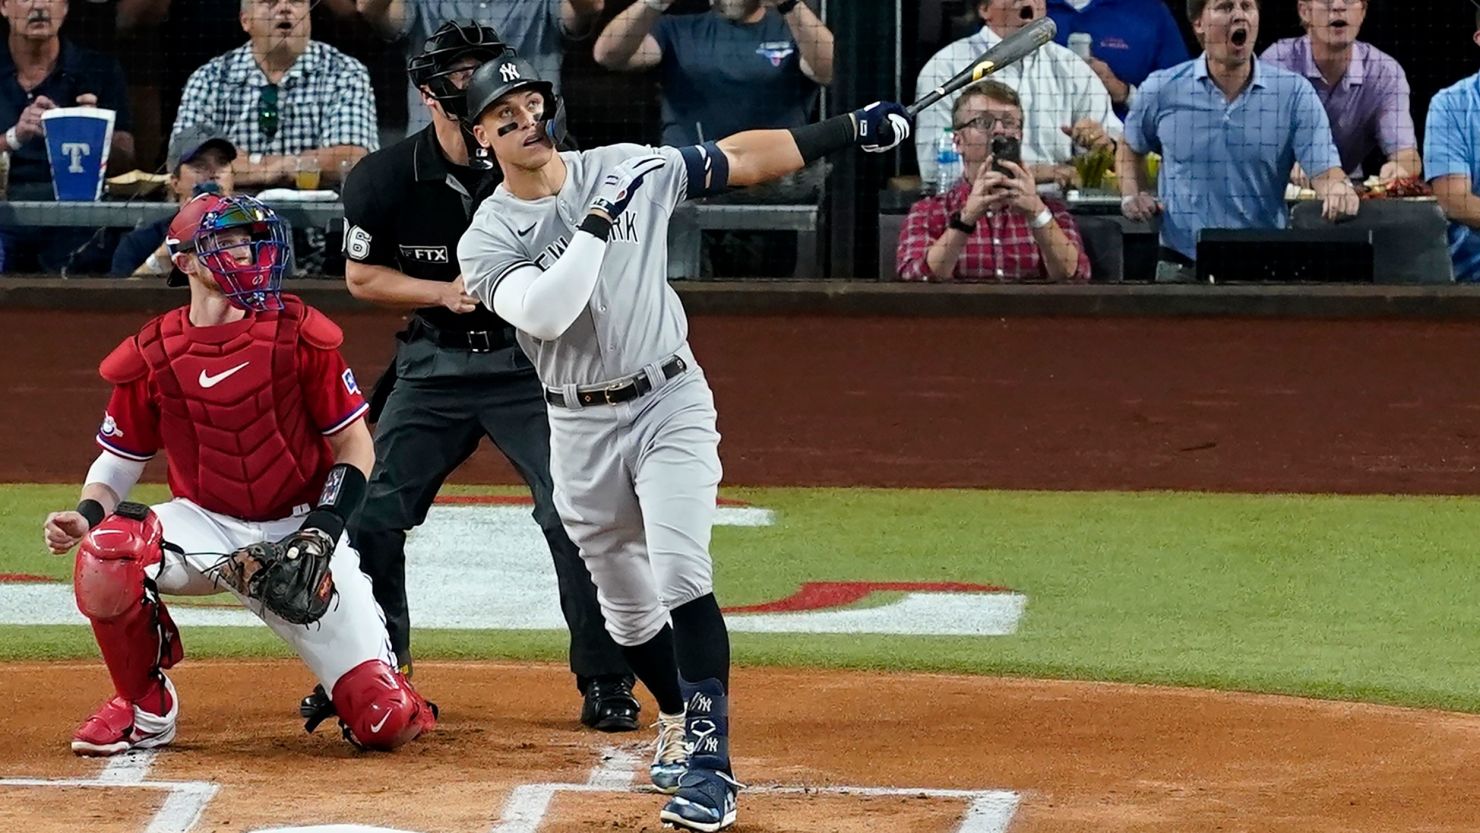 New York Yankees star Aaron Judge hits his 62nd home run in Arlington, Texas, on October 4. Intuition, and not just preparation and skill, can play a part in quick decision-making, according to science.